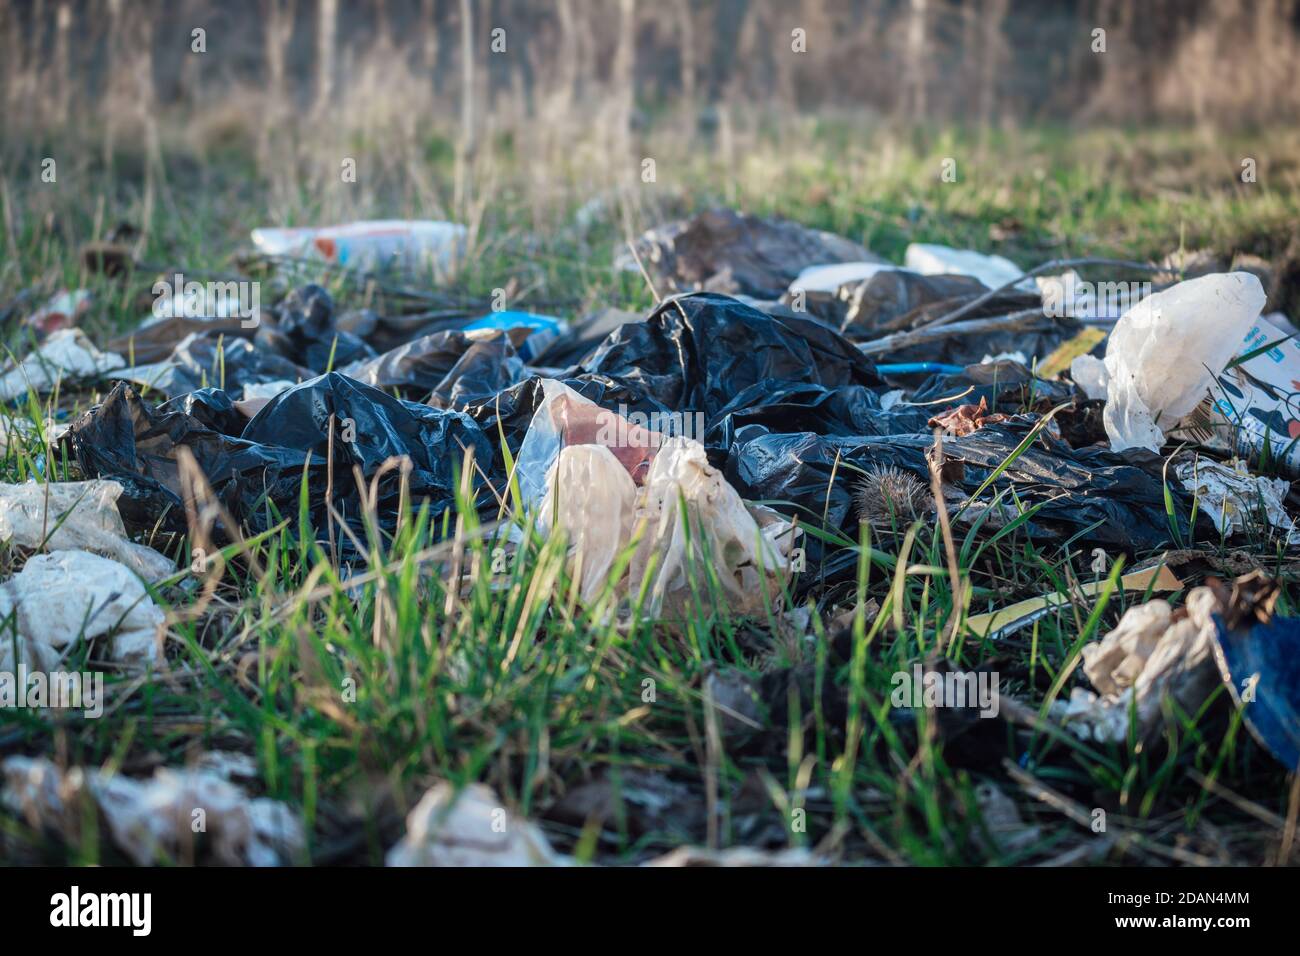 Garbage, thrash and junk outside the city. Close up, ecological problem, concept of environmental protection. Stock Photo